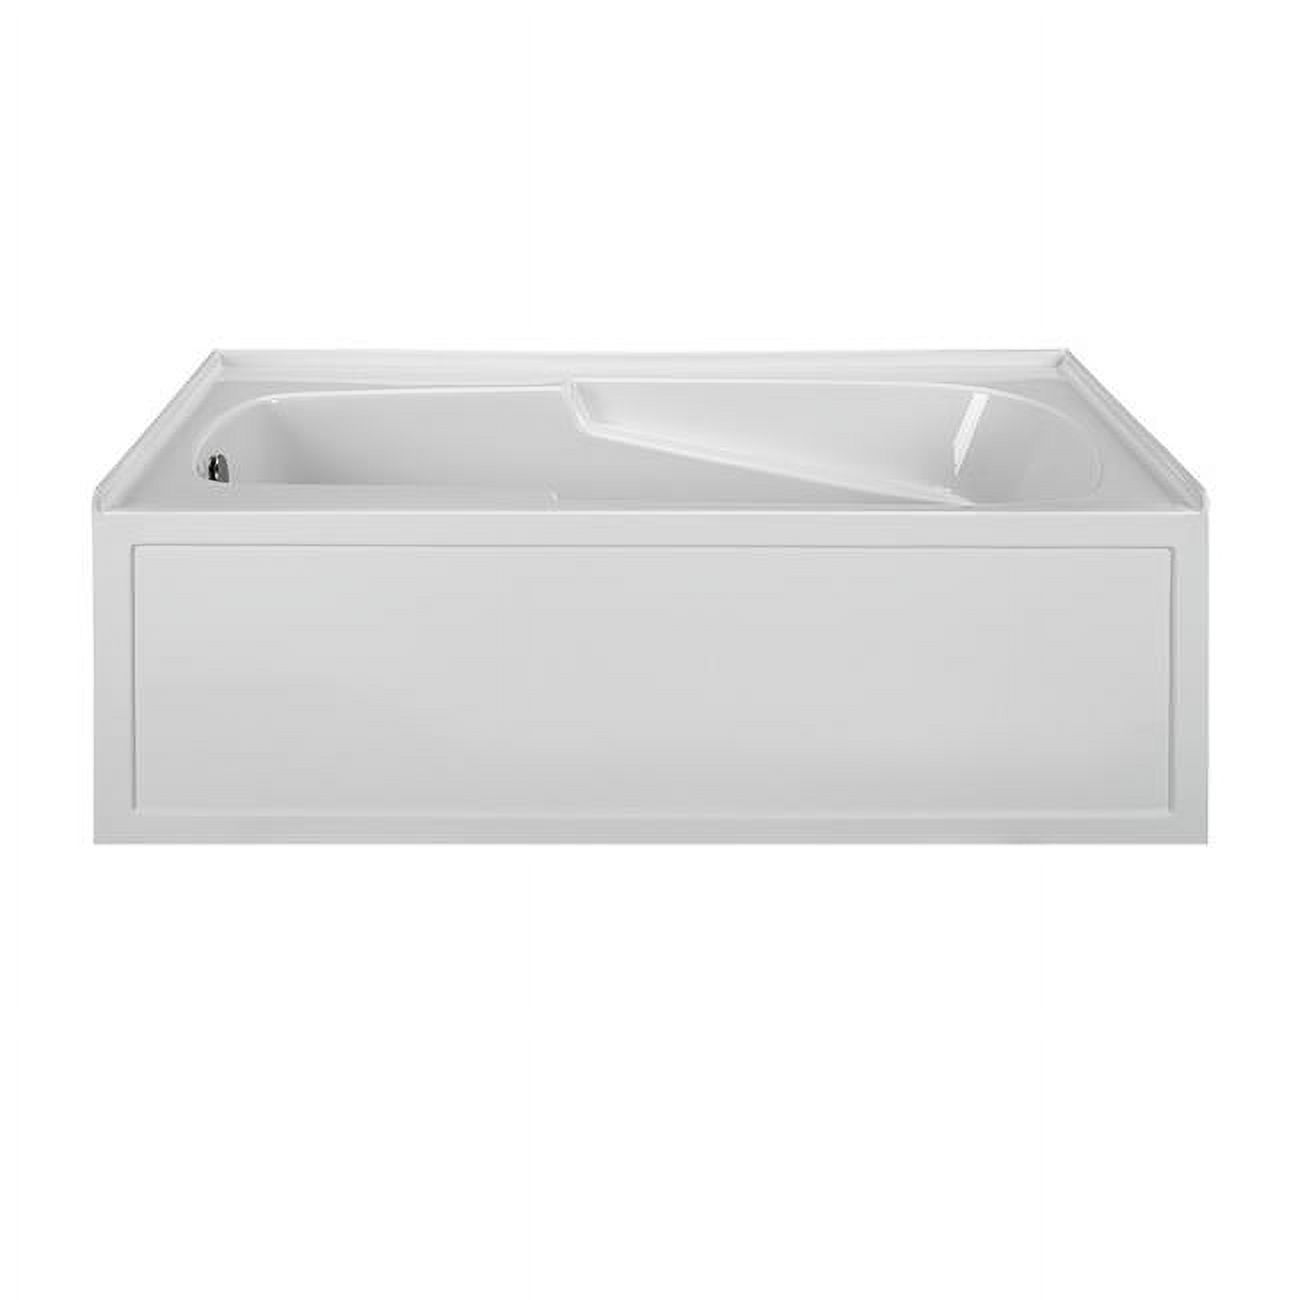 Integral Skirted End Drain Air Bath, Biscuit - 59.875 x 36 x 20 in. - Right Hand - image 1 of 1